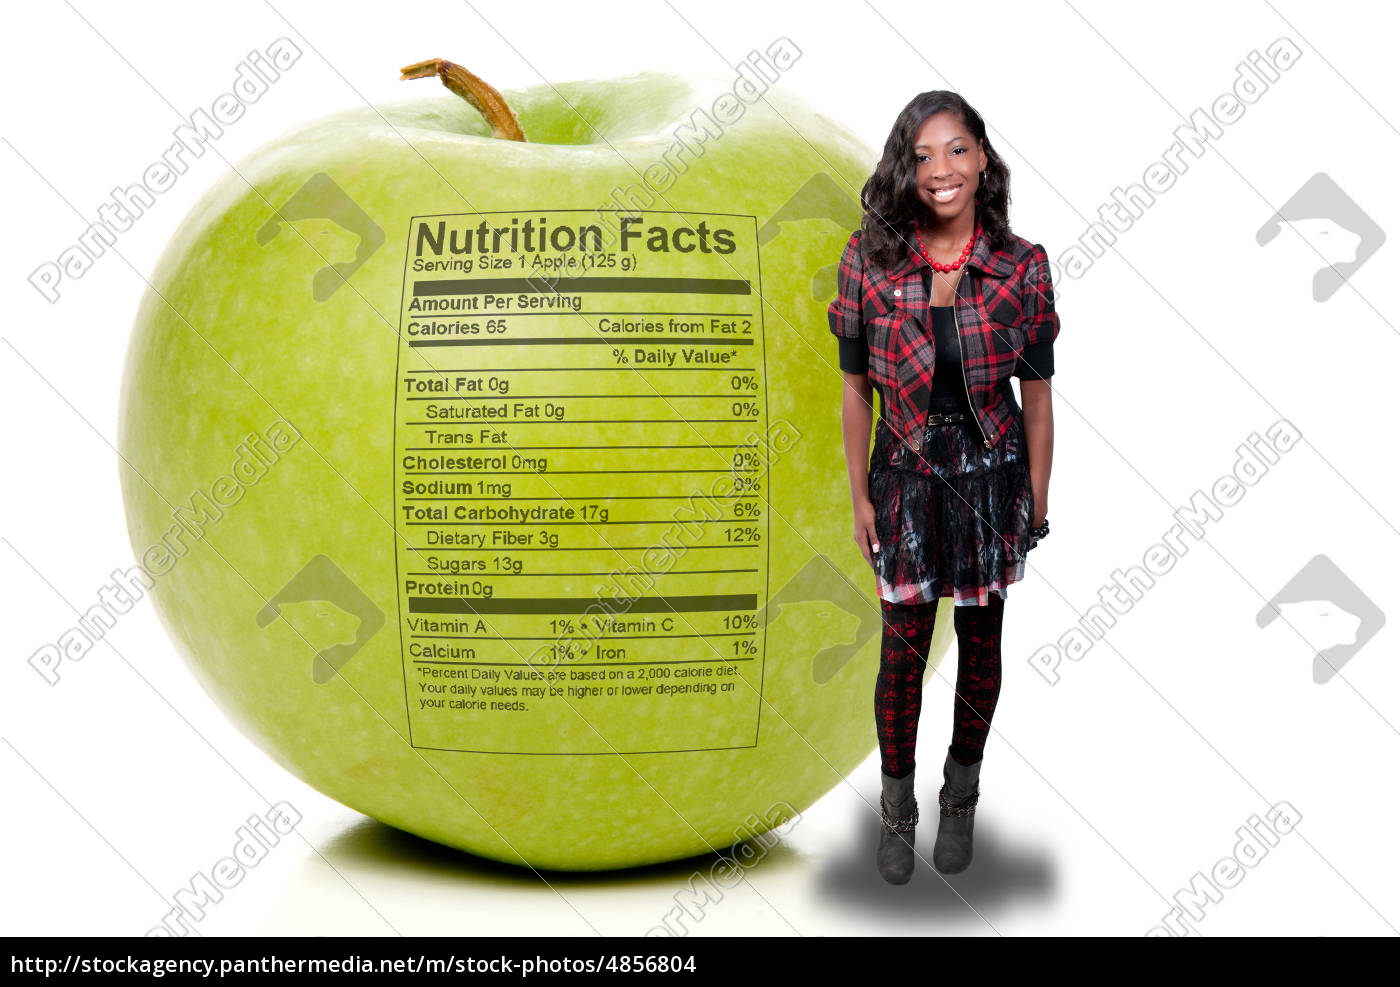 Nutritional Facts for Granny Smith